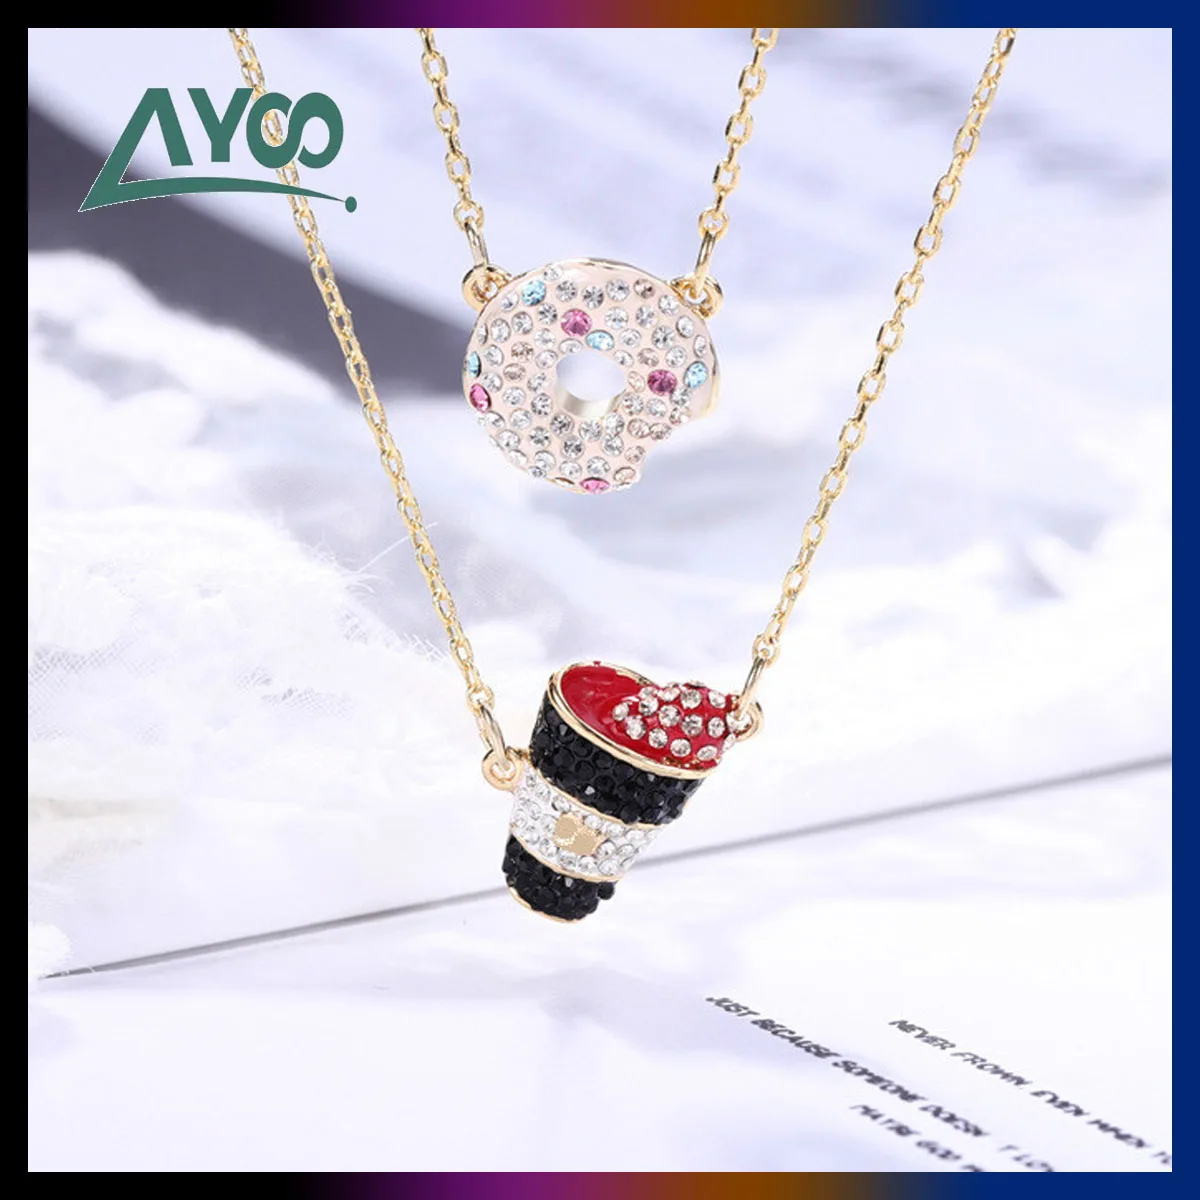 Fashion Jewelry SWA High Quality Exquisite Crystal Lovely Coffee Doughnut Shape Sweet Romantic Women Pendant Necklace Best Gift